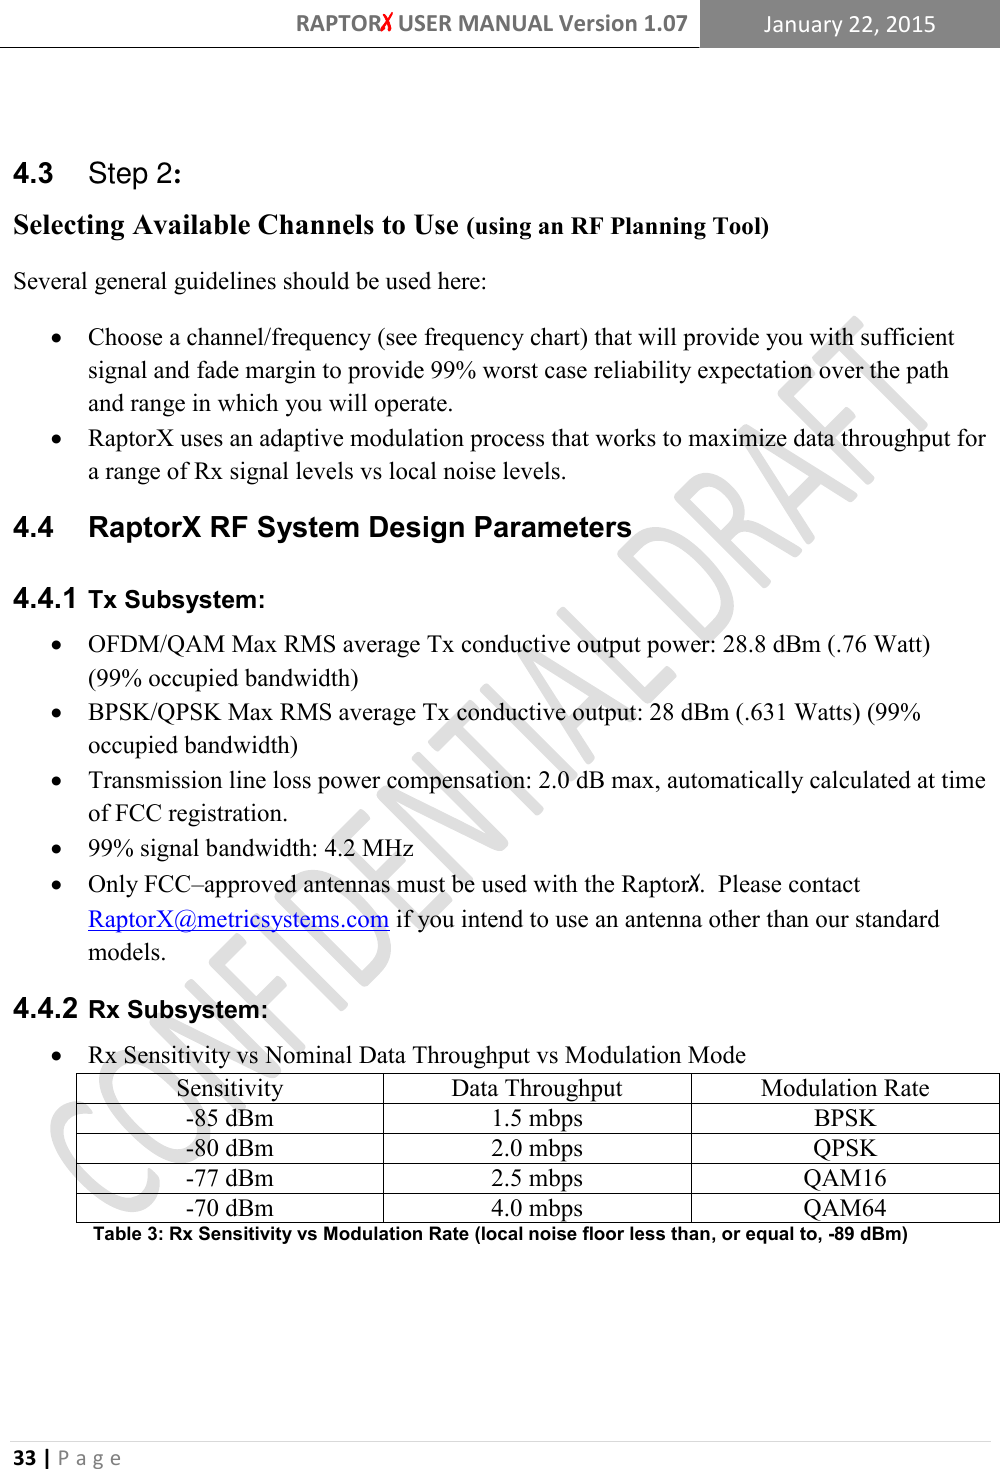 RAPTORX USER MANUAL Version 1.07 January 22, 2015  33 | P a g e    4.3    Step 2: Selecting Available Channels to Use (using an RF Planning Tool)   Several general guidelines should be used here:  Choose a channel/frequency (see frequency chart) that will provide you with sufficient signal and fade margin to provide 99% worst case reliability expectation over the path and range in which you will operate.  RaptorX uses an adaptive modulation process that works to maximize data throughput for a range of Rx signal levels vs local noise levels. 4.4   RaptorX RF System Design Parameters  Tx Subsystem: 4.4.1 OFDM/QAM Max RMS average Tx conductive output power: 28.8 dBm (.76 Watt) (99% occupied bandwidth)  BPSK/QPSK Max RMS average Tx conductive output: 28 dBm (.631 Watts) (99% occupied bandwidth)  Transmission line loss power compensation: 2.0 dB max, automatically calculated at time of FCC registration.  99% signal bandwidth: 4.2 MHz  Only FCC–approved antennas must be used with the RaptorX.  Please contact RaptorX@metricsystems.com if you intend to use an antenna other than our standard models.  Rx Subsystem: 4.4.2 Rx Sensitivity vs Nominal Data Throughput vs Modulation Mode Sensitivity Data Throughput Modulation Rate -85 dBm 1.5 mbps BPSK -80 dBm 2.0 mbps QPSK -77 dBm 2.5 mbps QAM16 -70 dBm 4.0 mbps QAM64 Table 3: Rx Sensitivity vs Modulation Rate (local noise floor less than, or equal to, -89 dBm)  